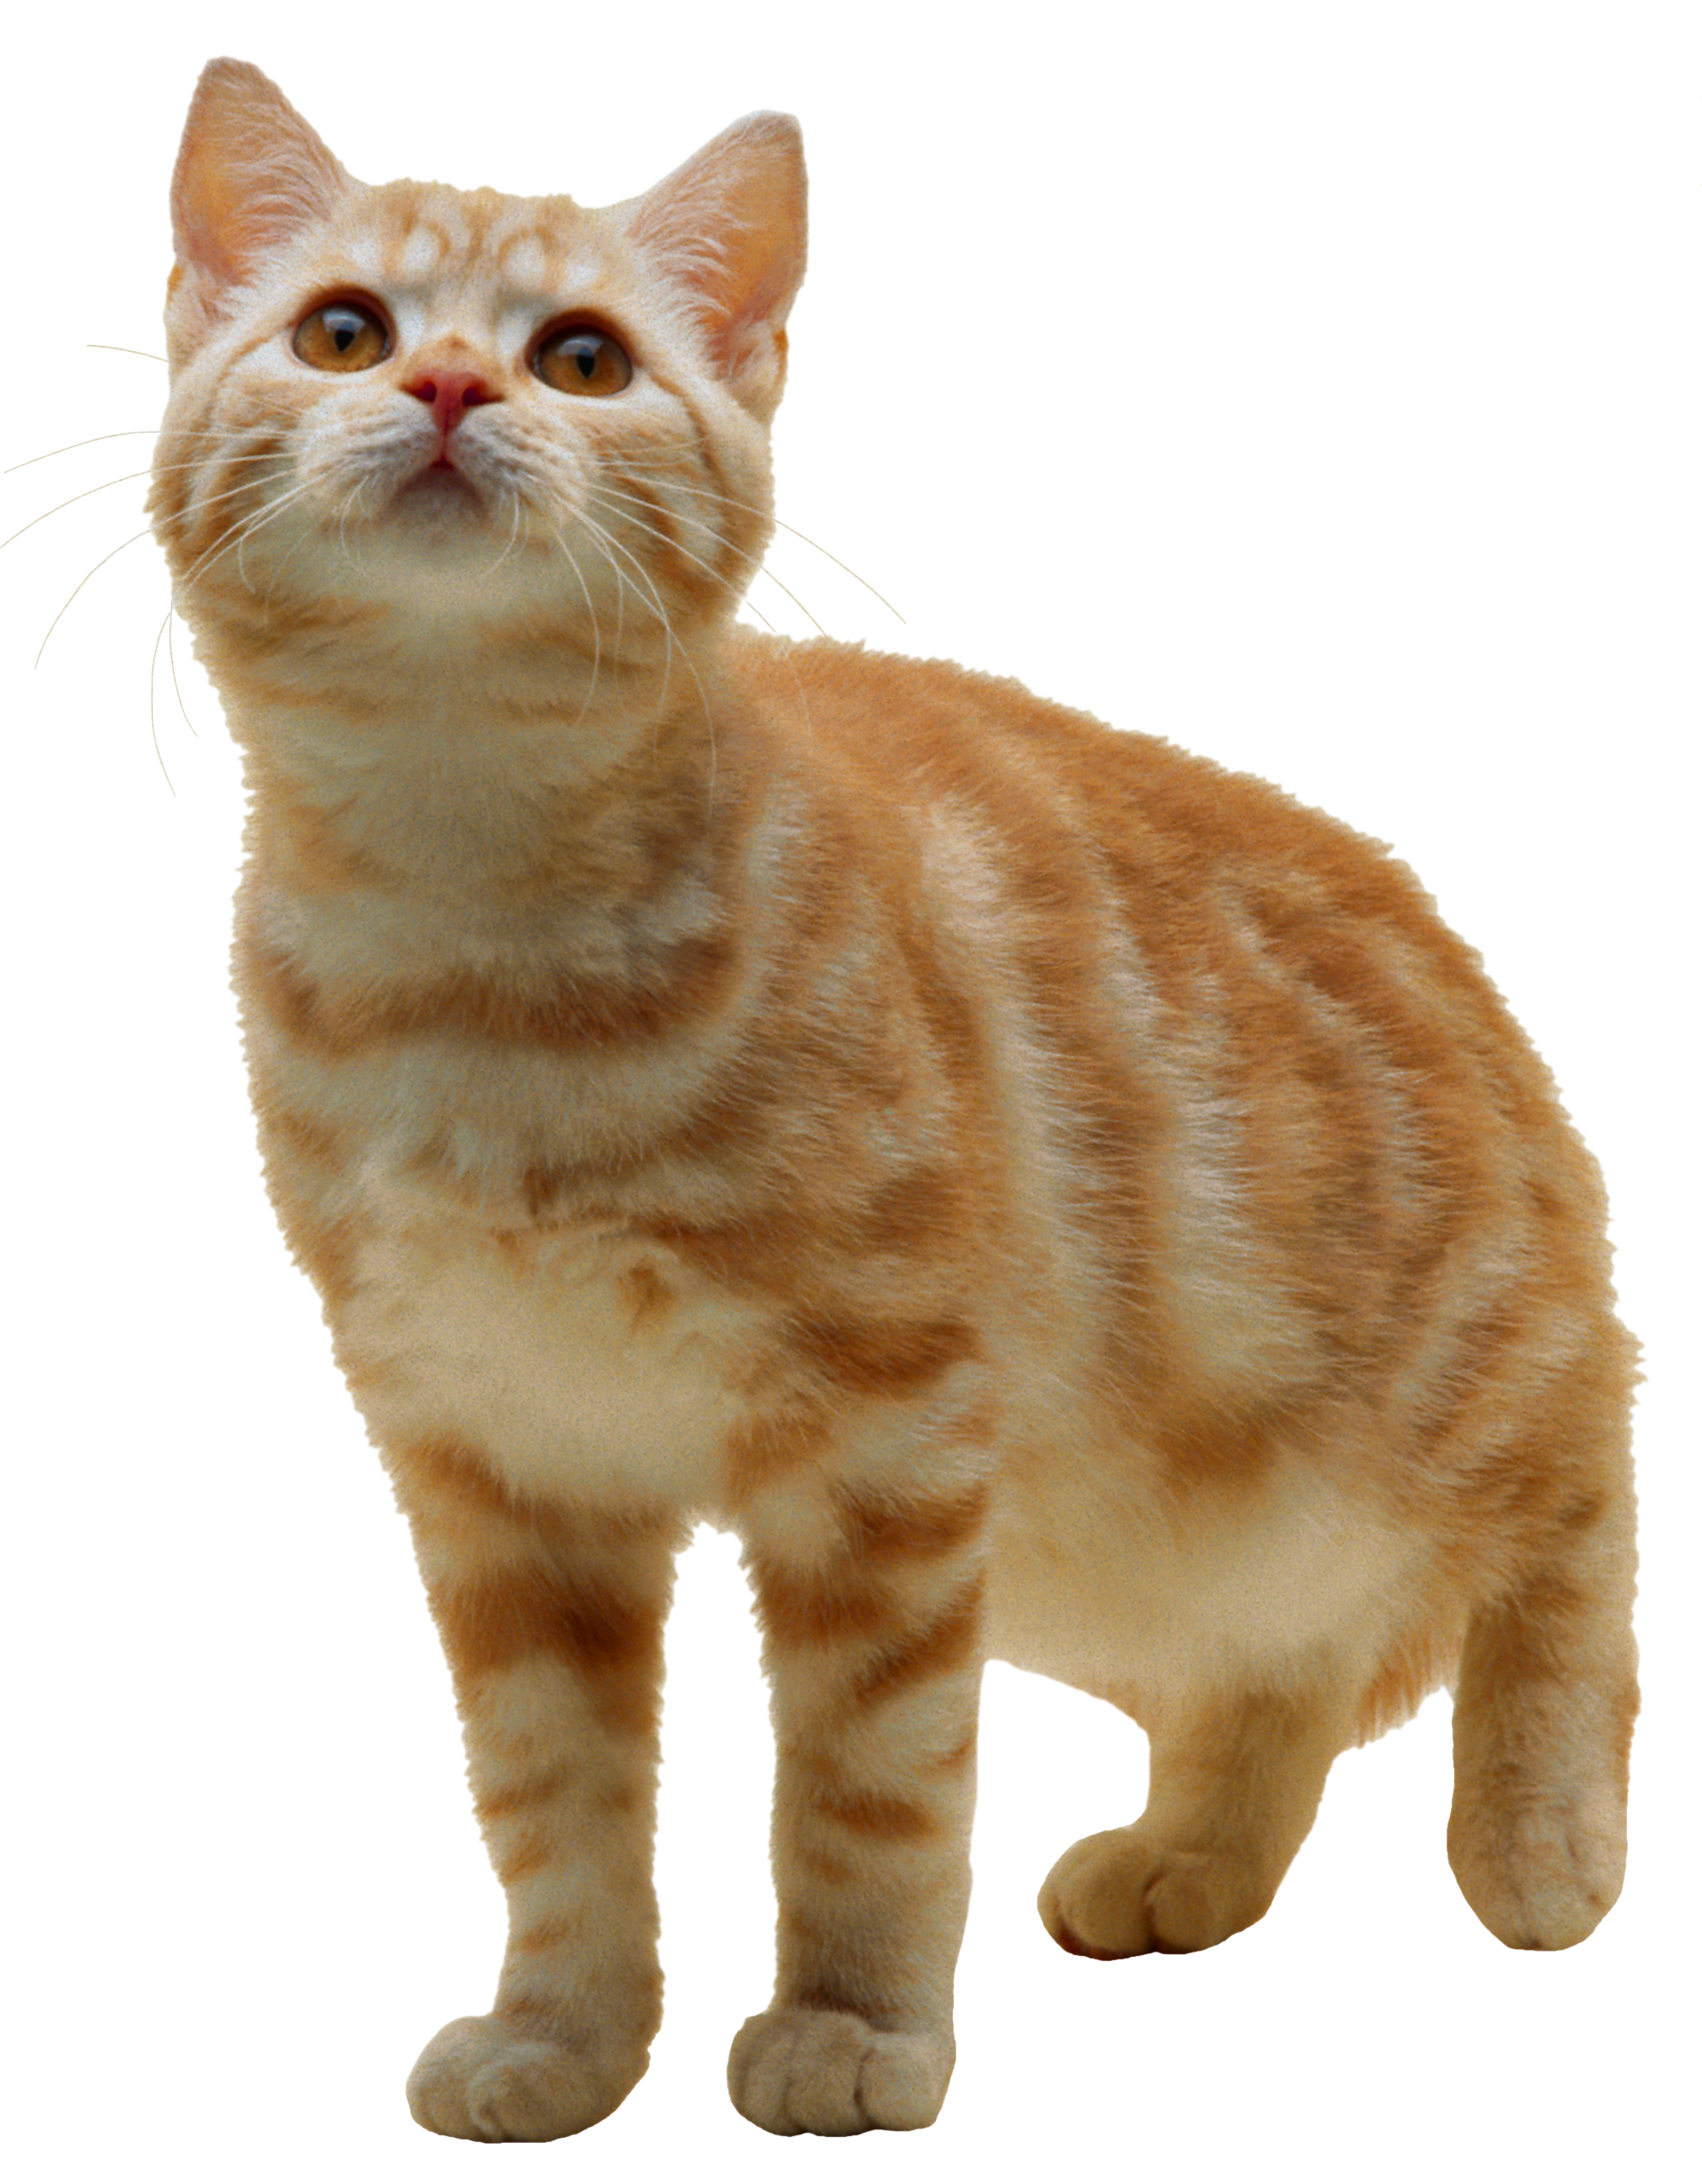 PNG HD Pictures Of Cats - 155927